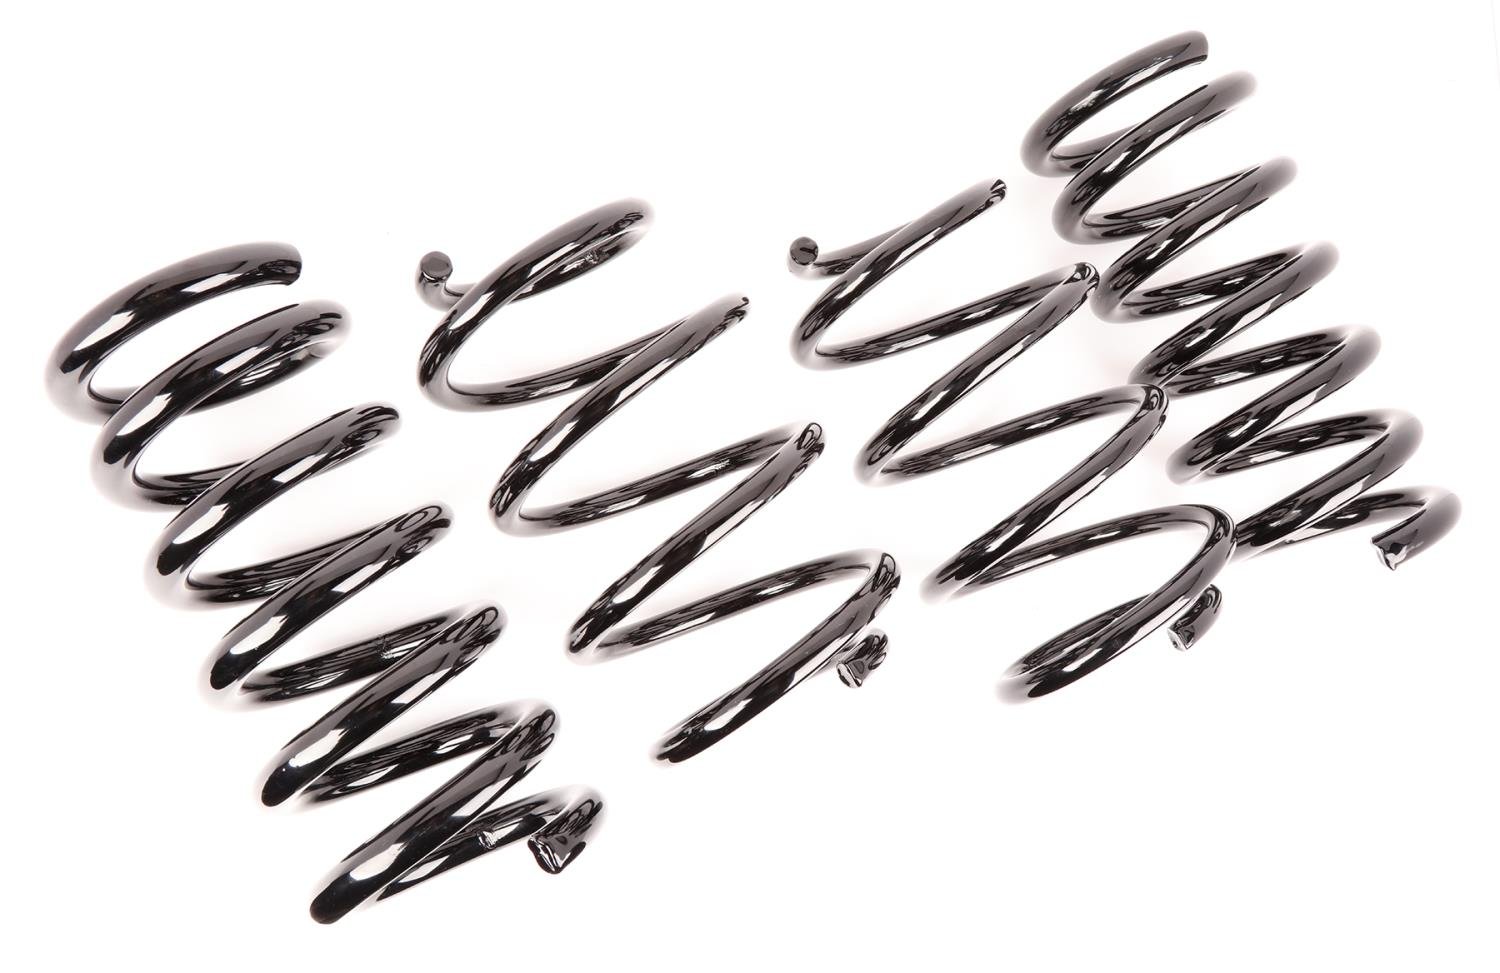 AXS Lowering Spring Kit Late Model Ford Mustang V8 Coupe [1.250 in. Front/1.250 in. Rear Drop]